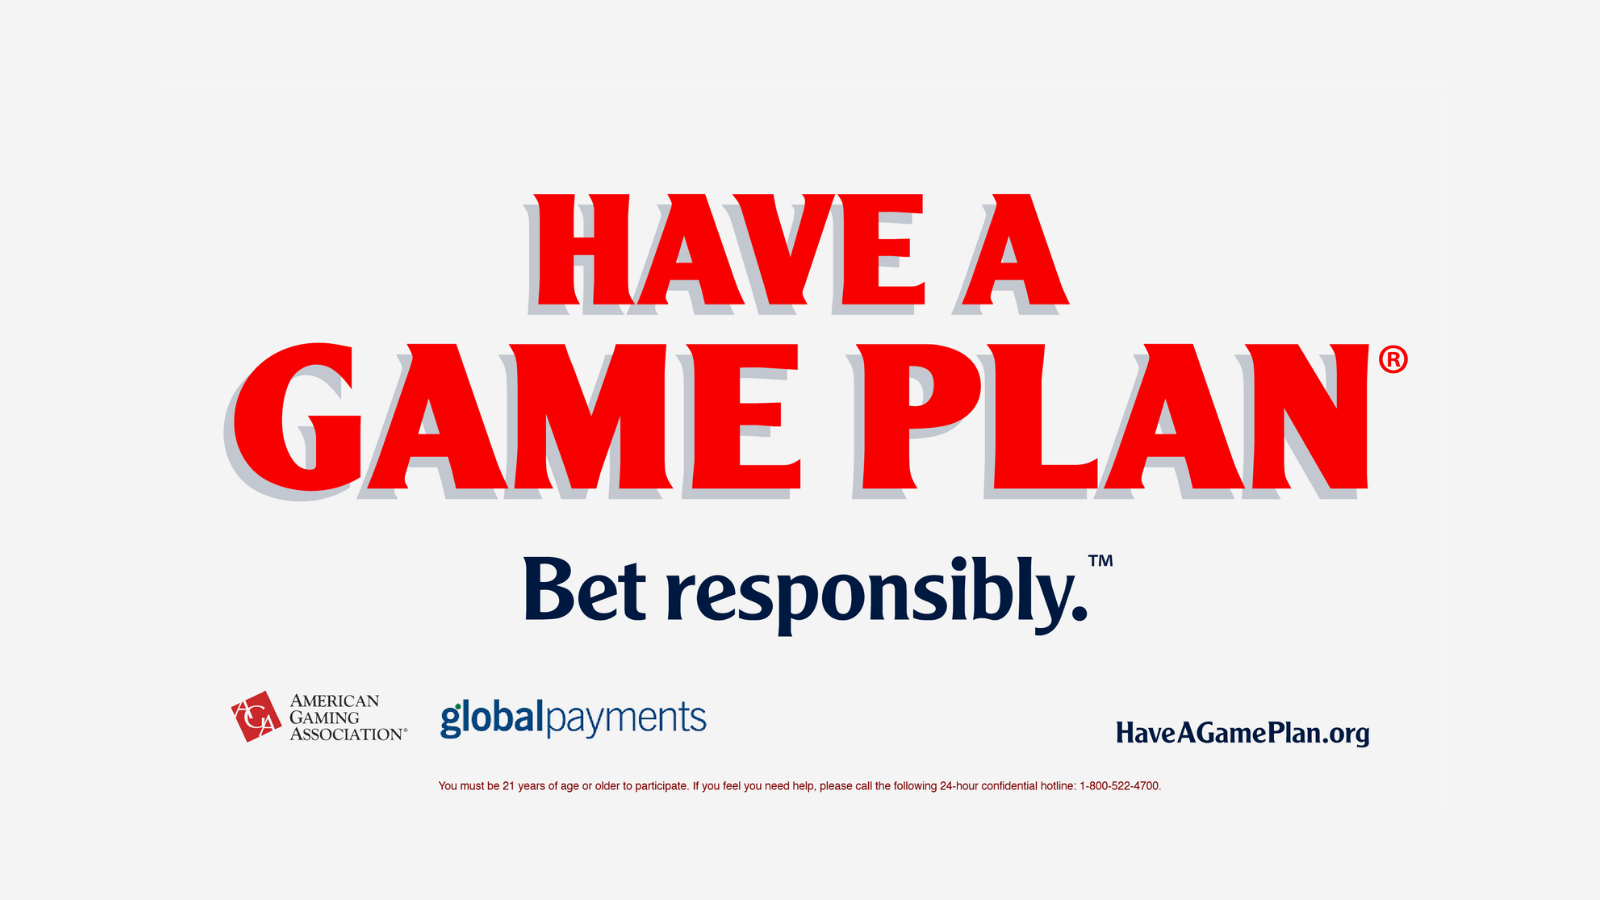 Global Payments Joins AGA’s Responsible Sports Betting Campaign